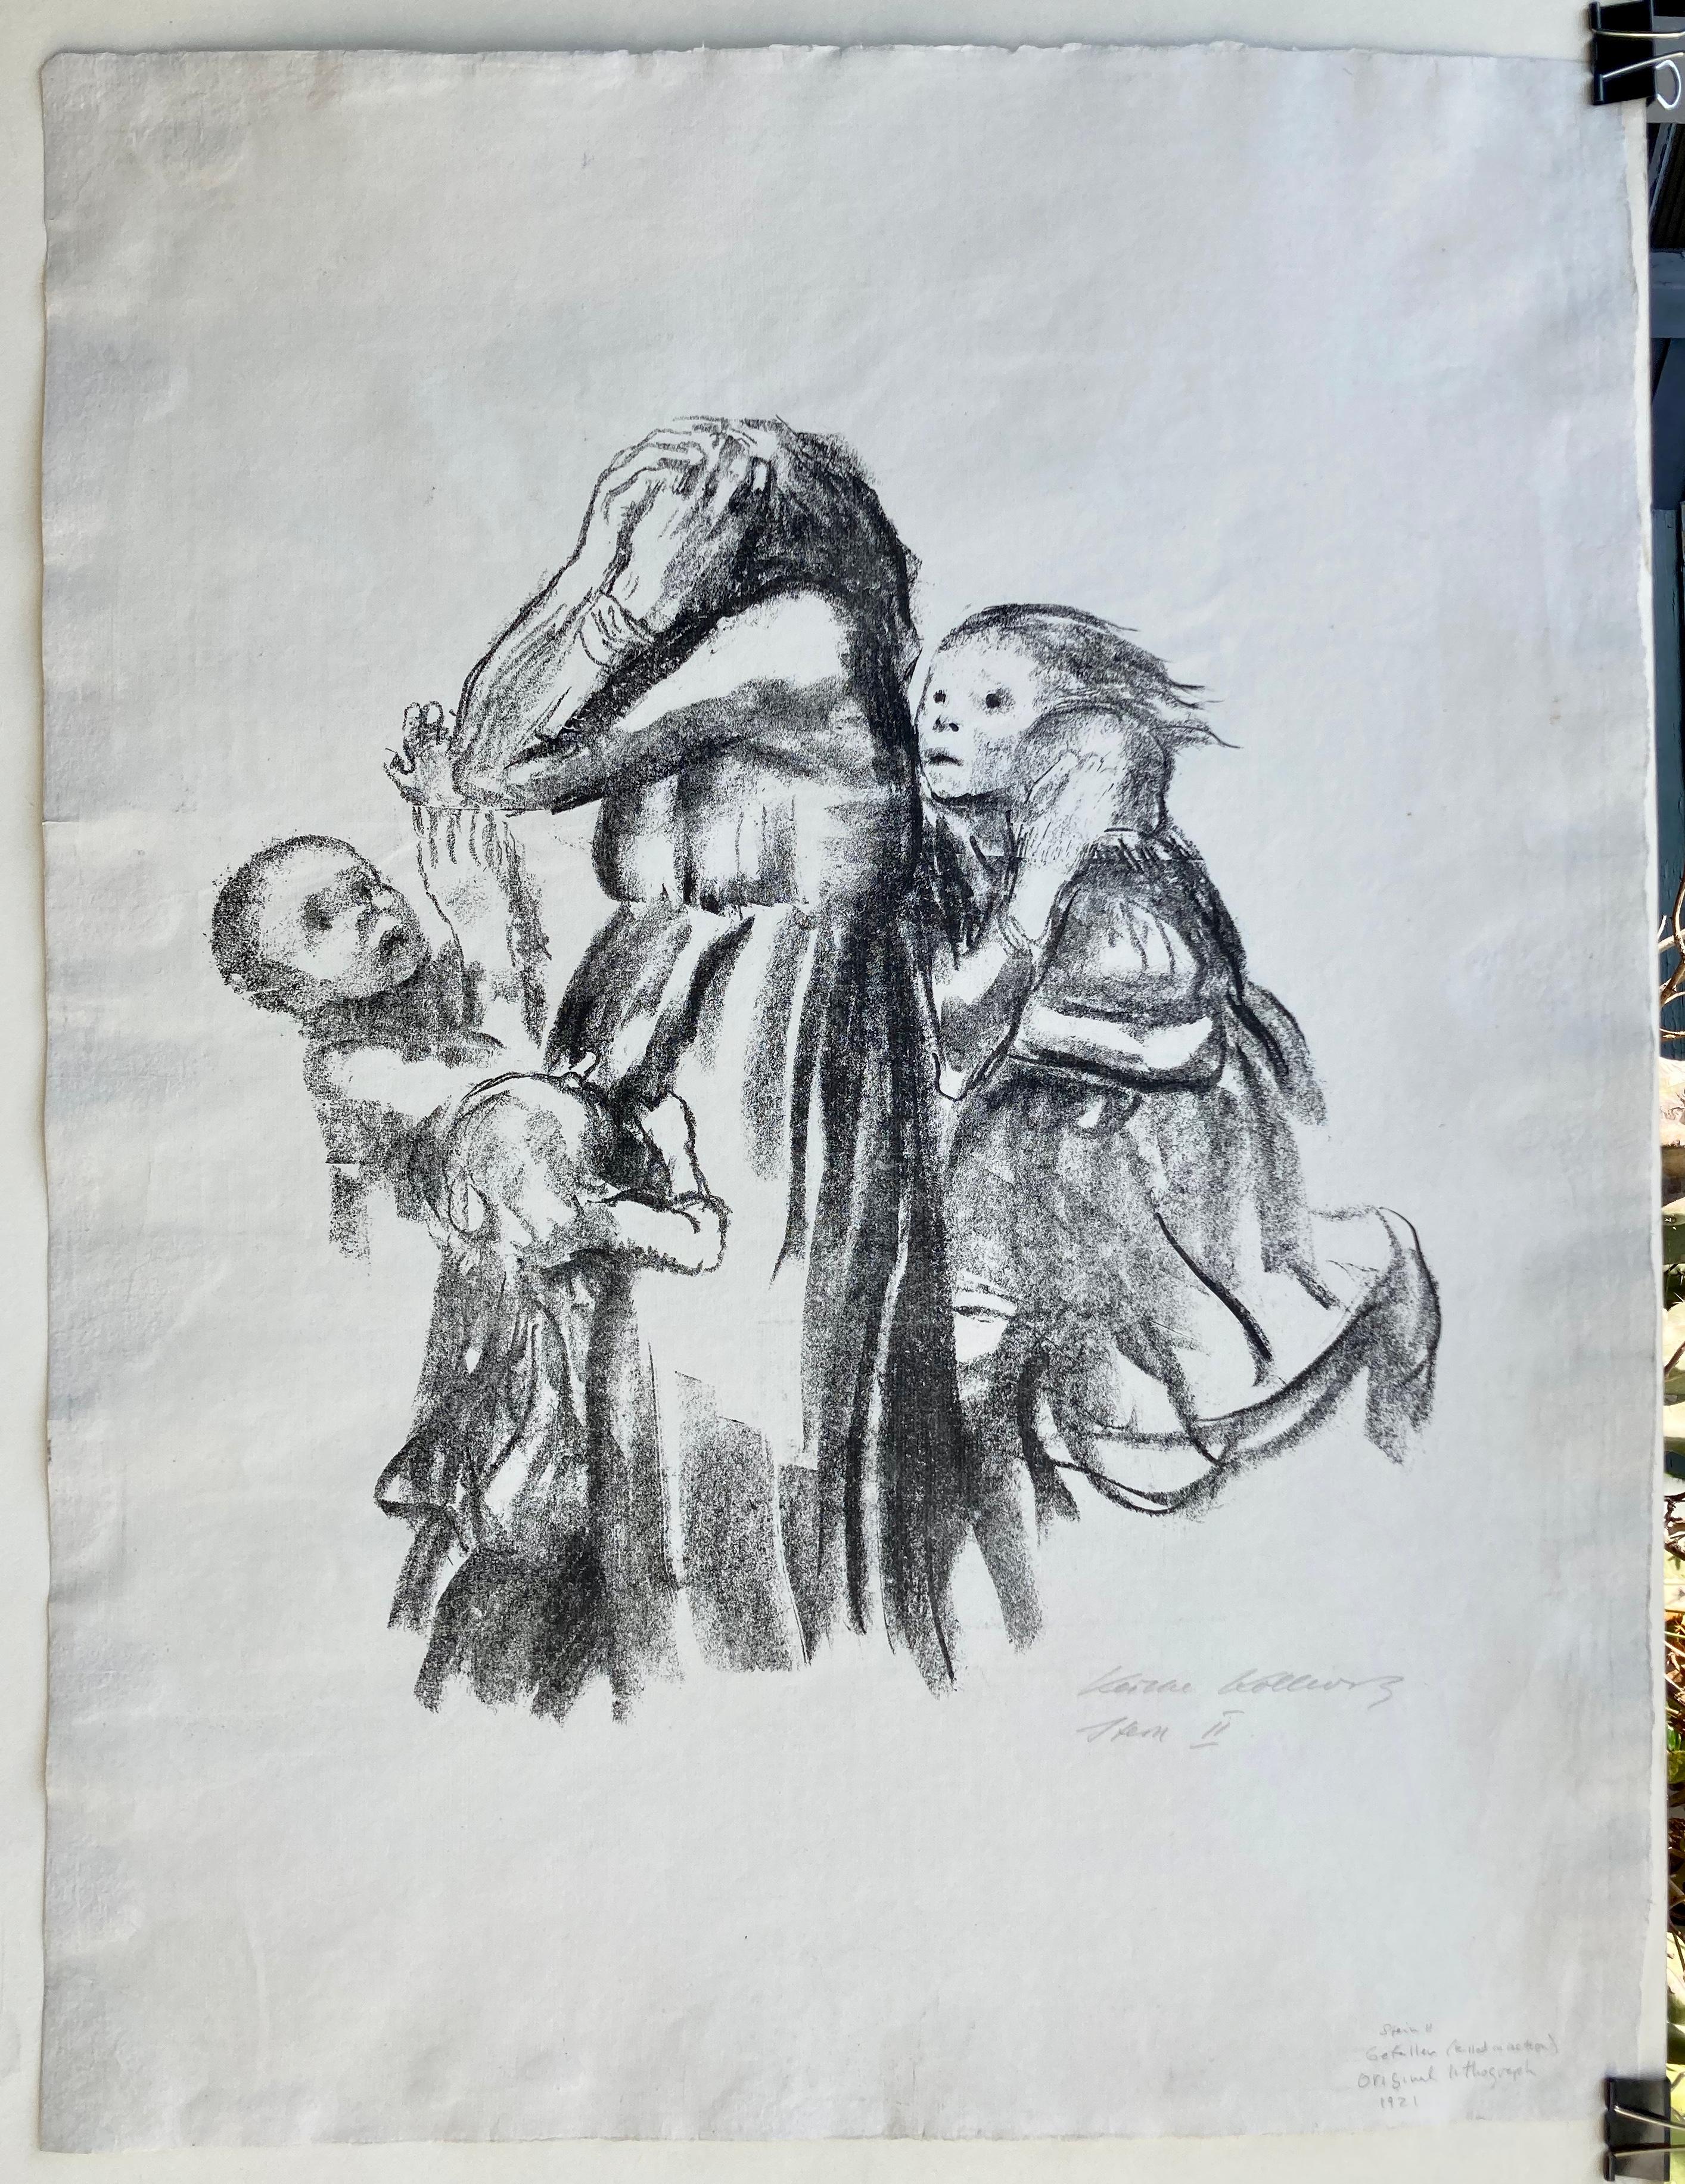 KATHE KOLLWITZ (1867-1945)

GEFALLEN (Killed in Action) 1920 (Klipstein 153 (1st state, a of c of 2 states)
Lithograph on laid paper. Image 16 ¼ x 15 ¼ inches, Large Full Sheet, 25 ½ x 19 3/8 inches. Signed and inscribed 